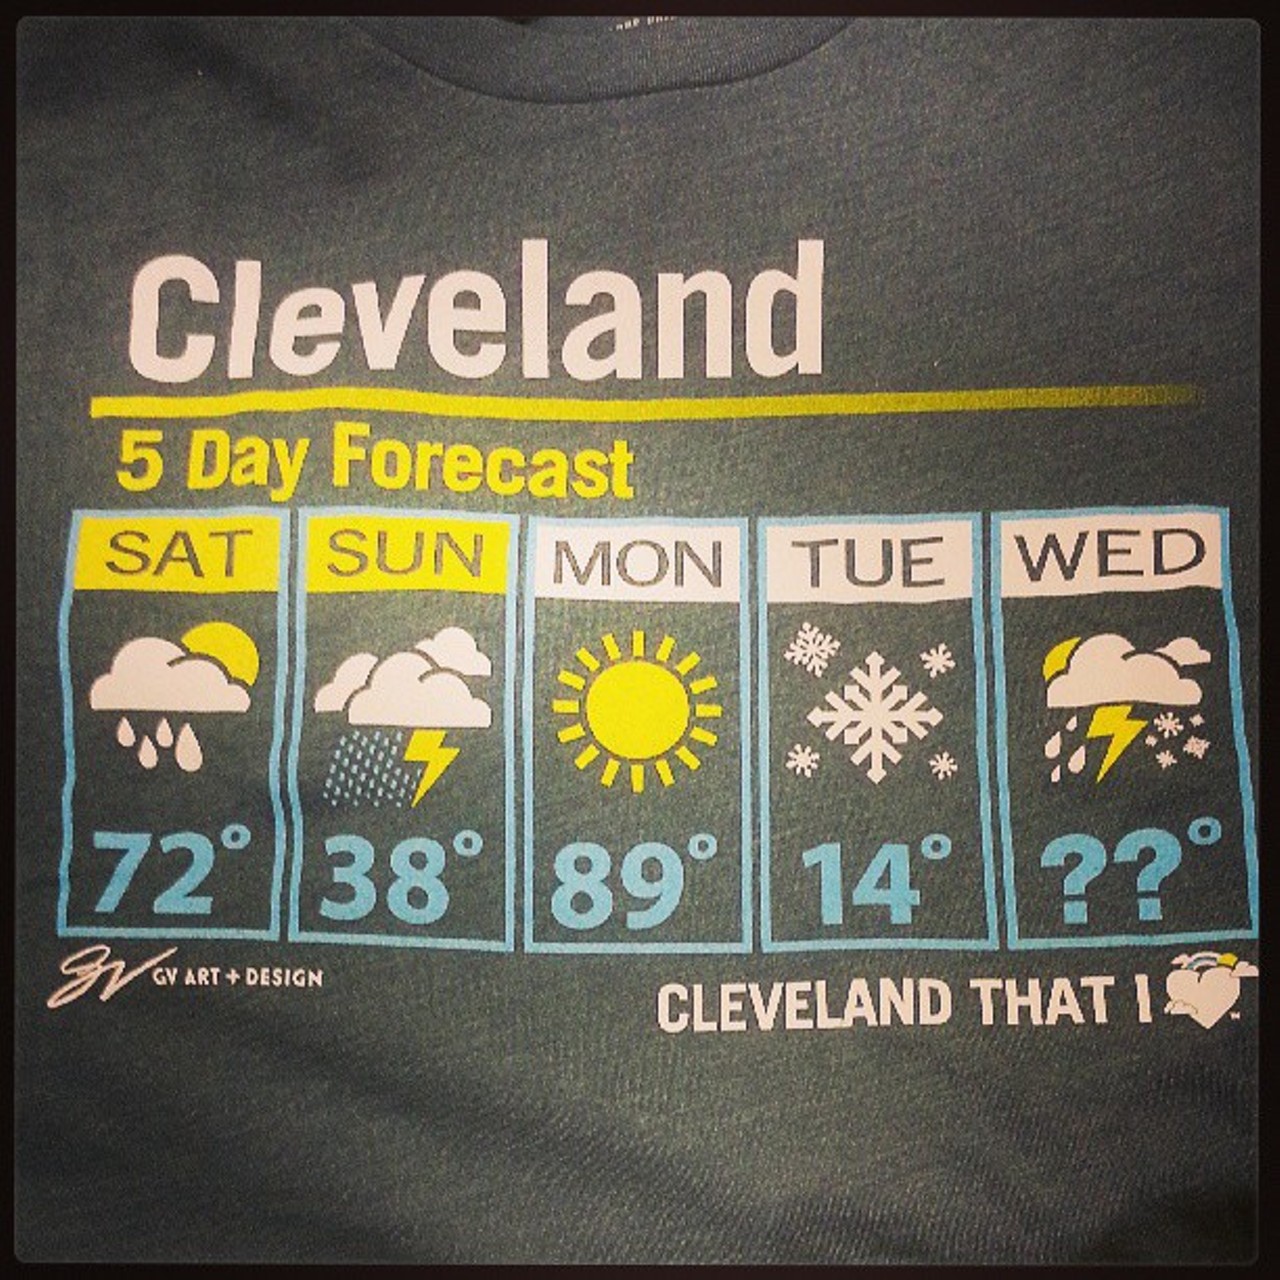 20 Things Clevelanders Love to Hate About Cleveland